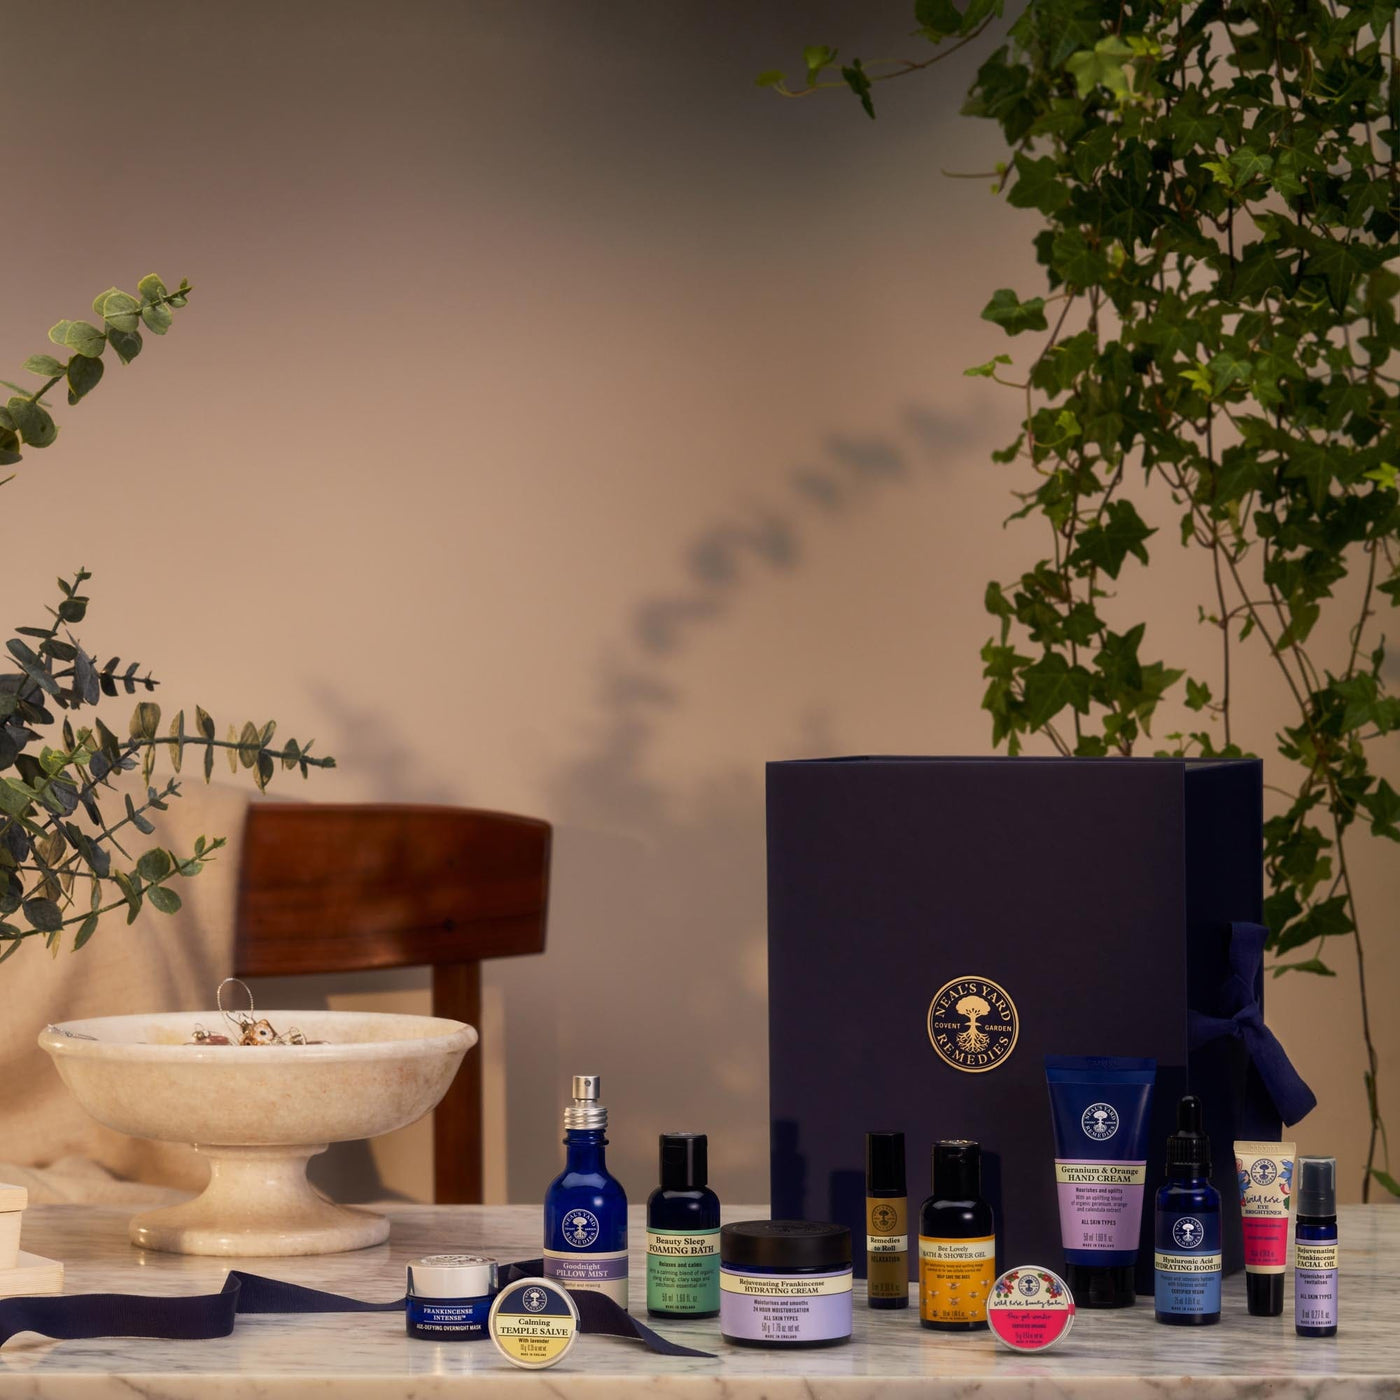 Neal's Yard Remedies Christmas Gifts 12 Days of Beauty & Wellbeing Calendar